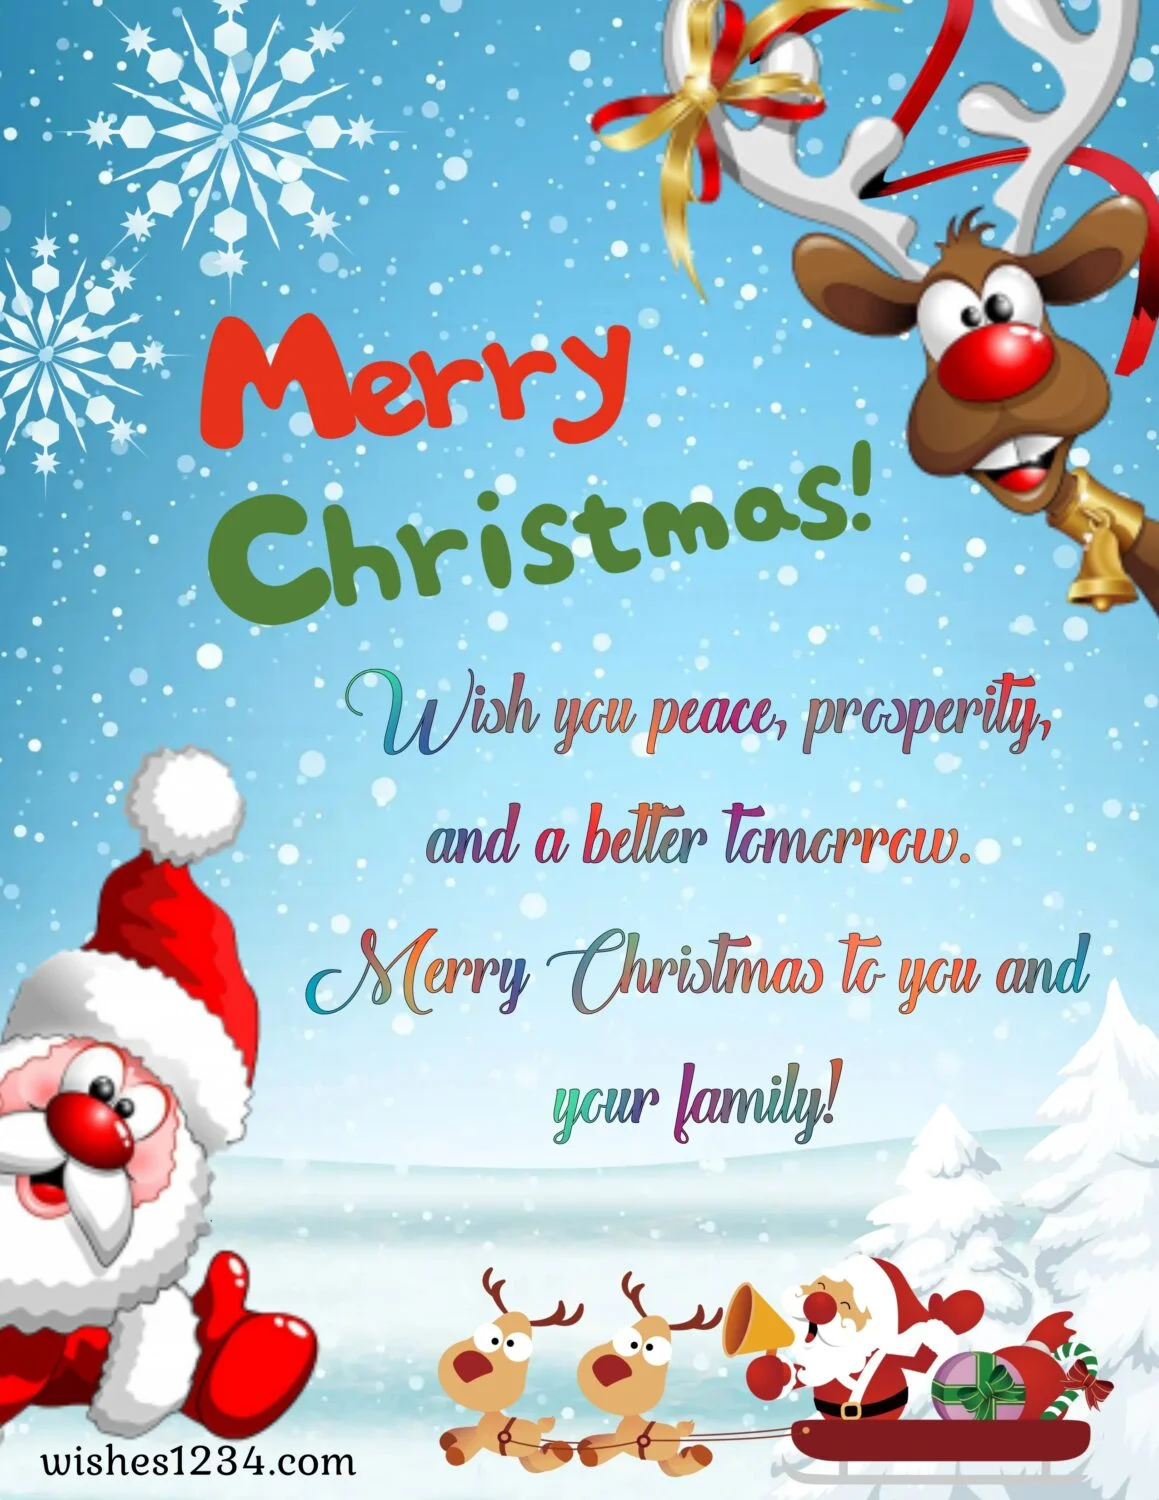 Santa with sledge, Merry Christmas Quotes & short wishes.